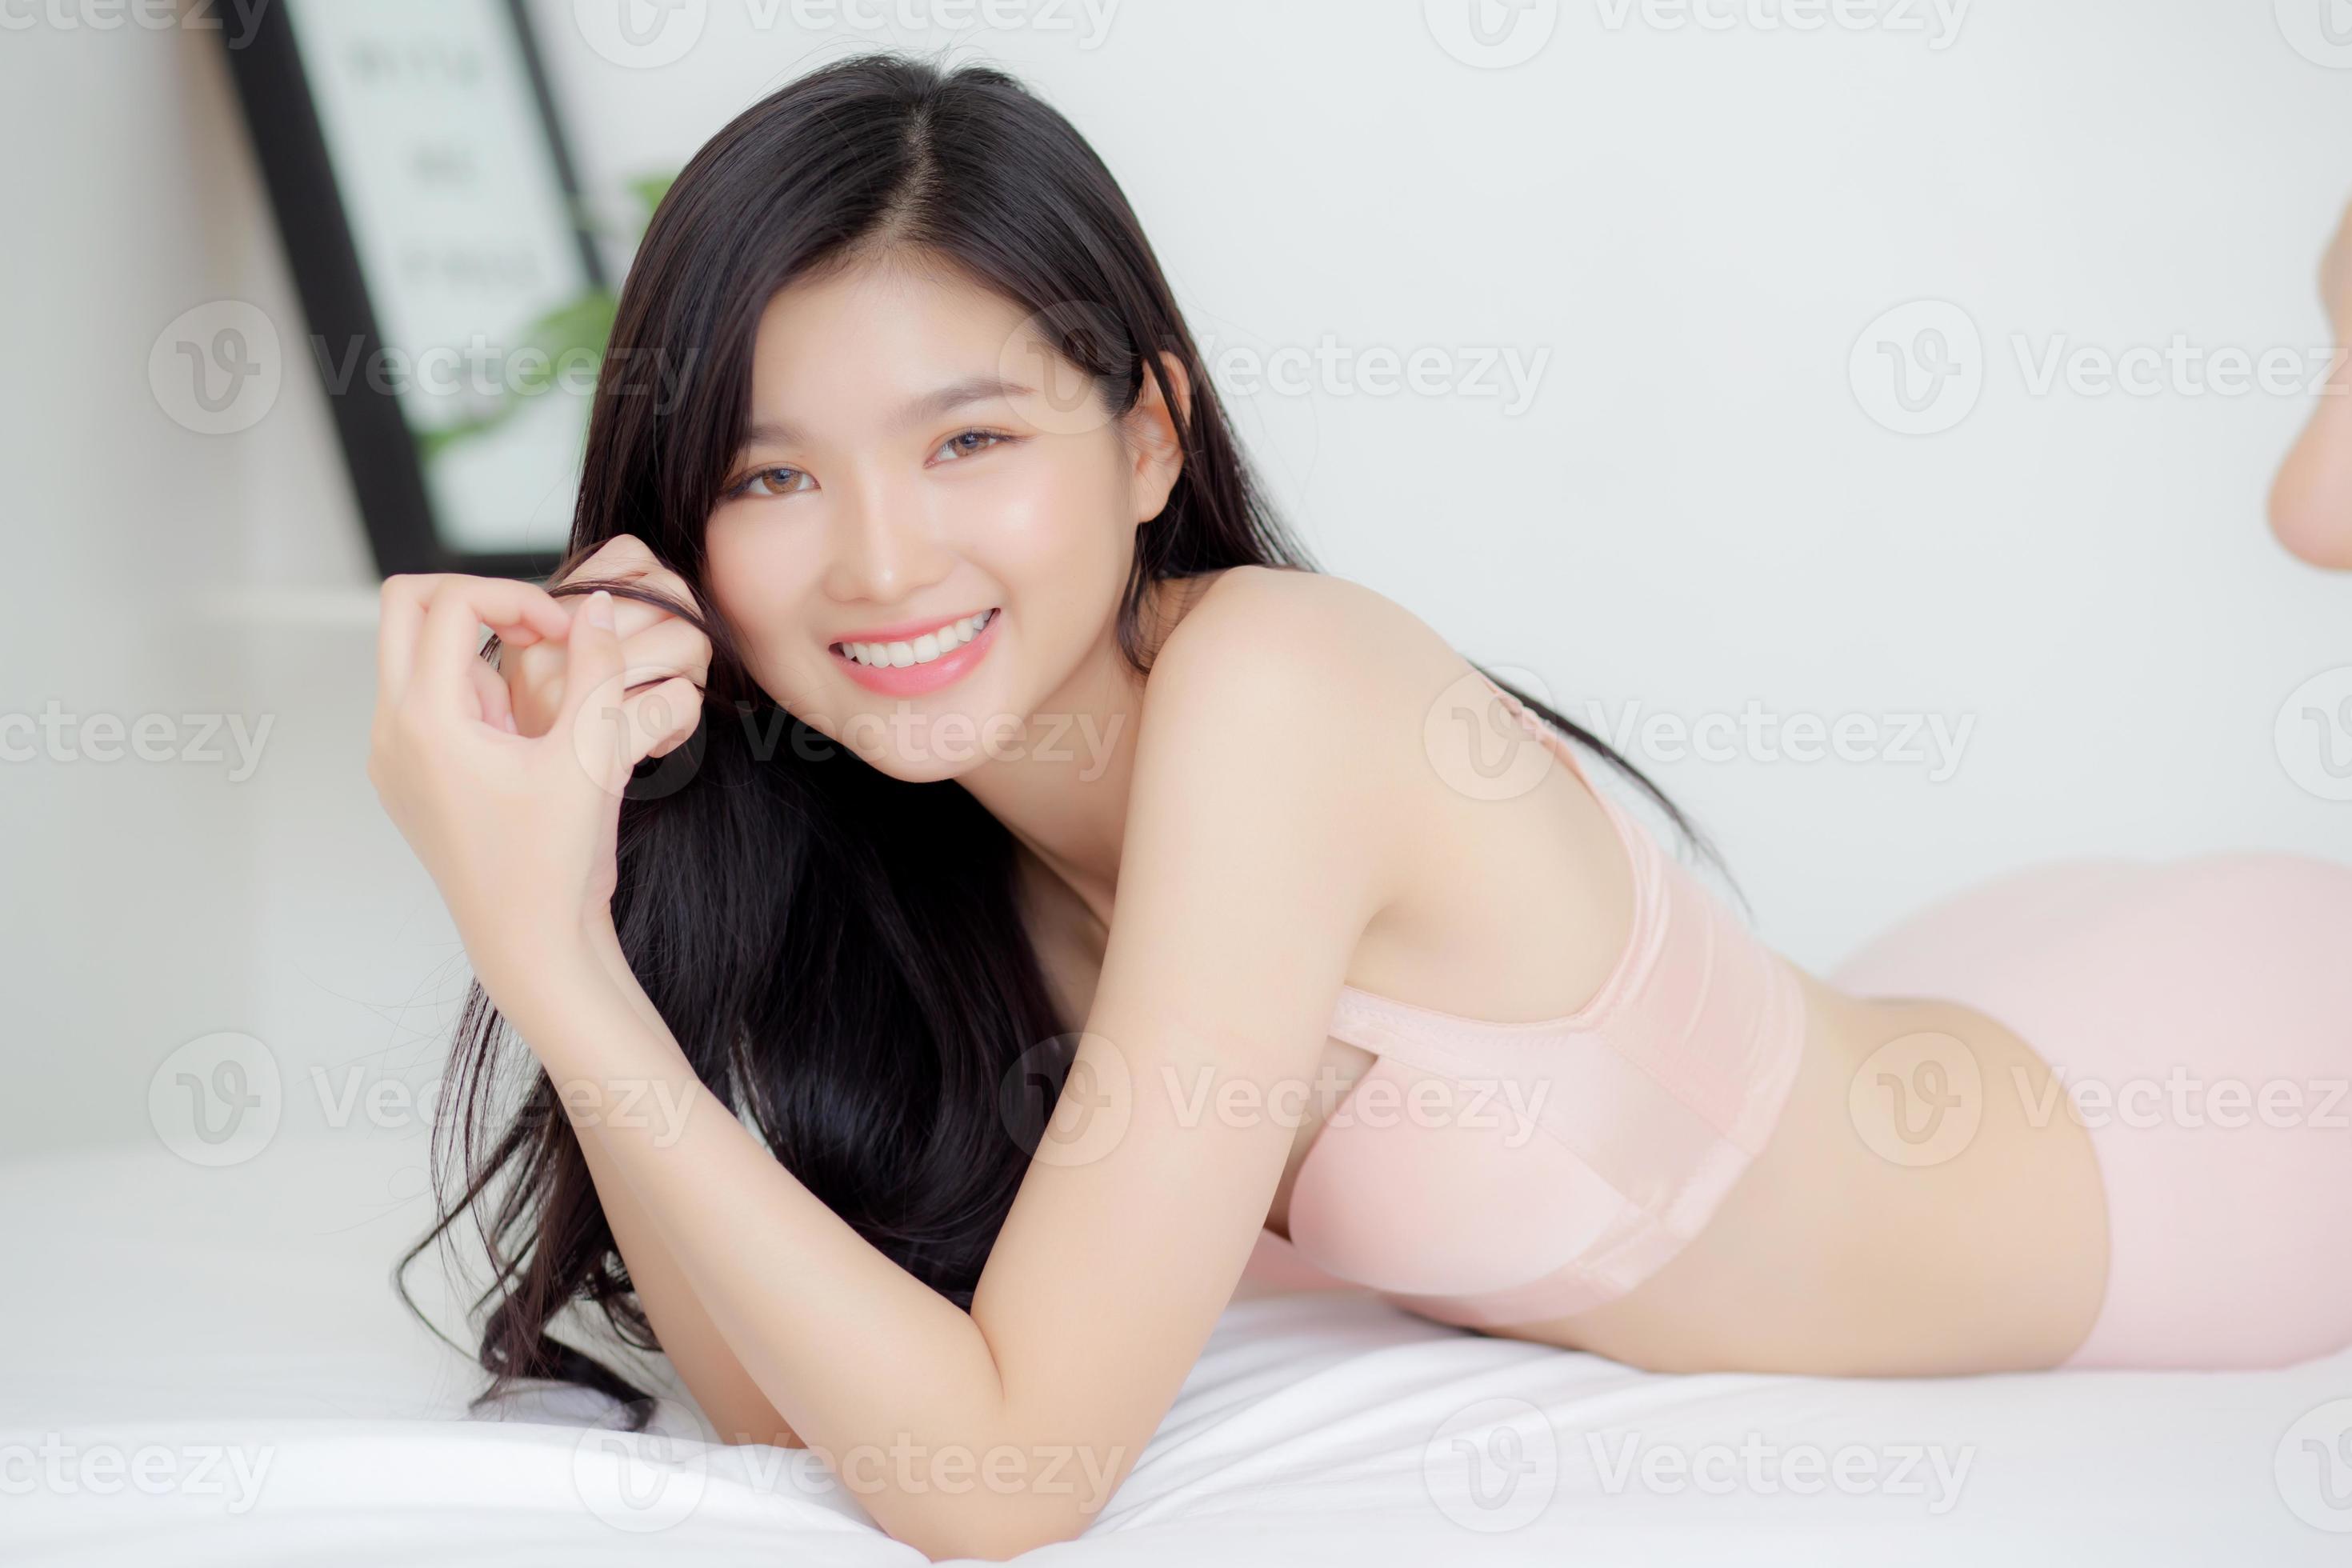 Beautiful portrait young asian woman sexy in underwear figure fit relax with seductive in bedroom, asia girl body slim in lingerie confident and happy lying on bed in bedchamber, lifestyle concept image